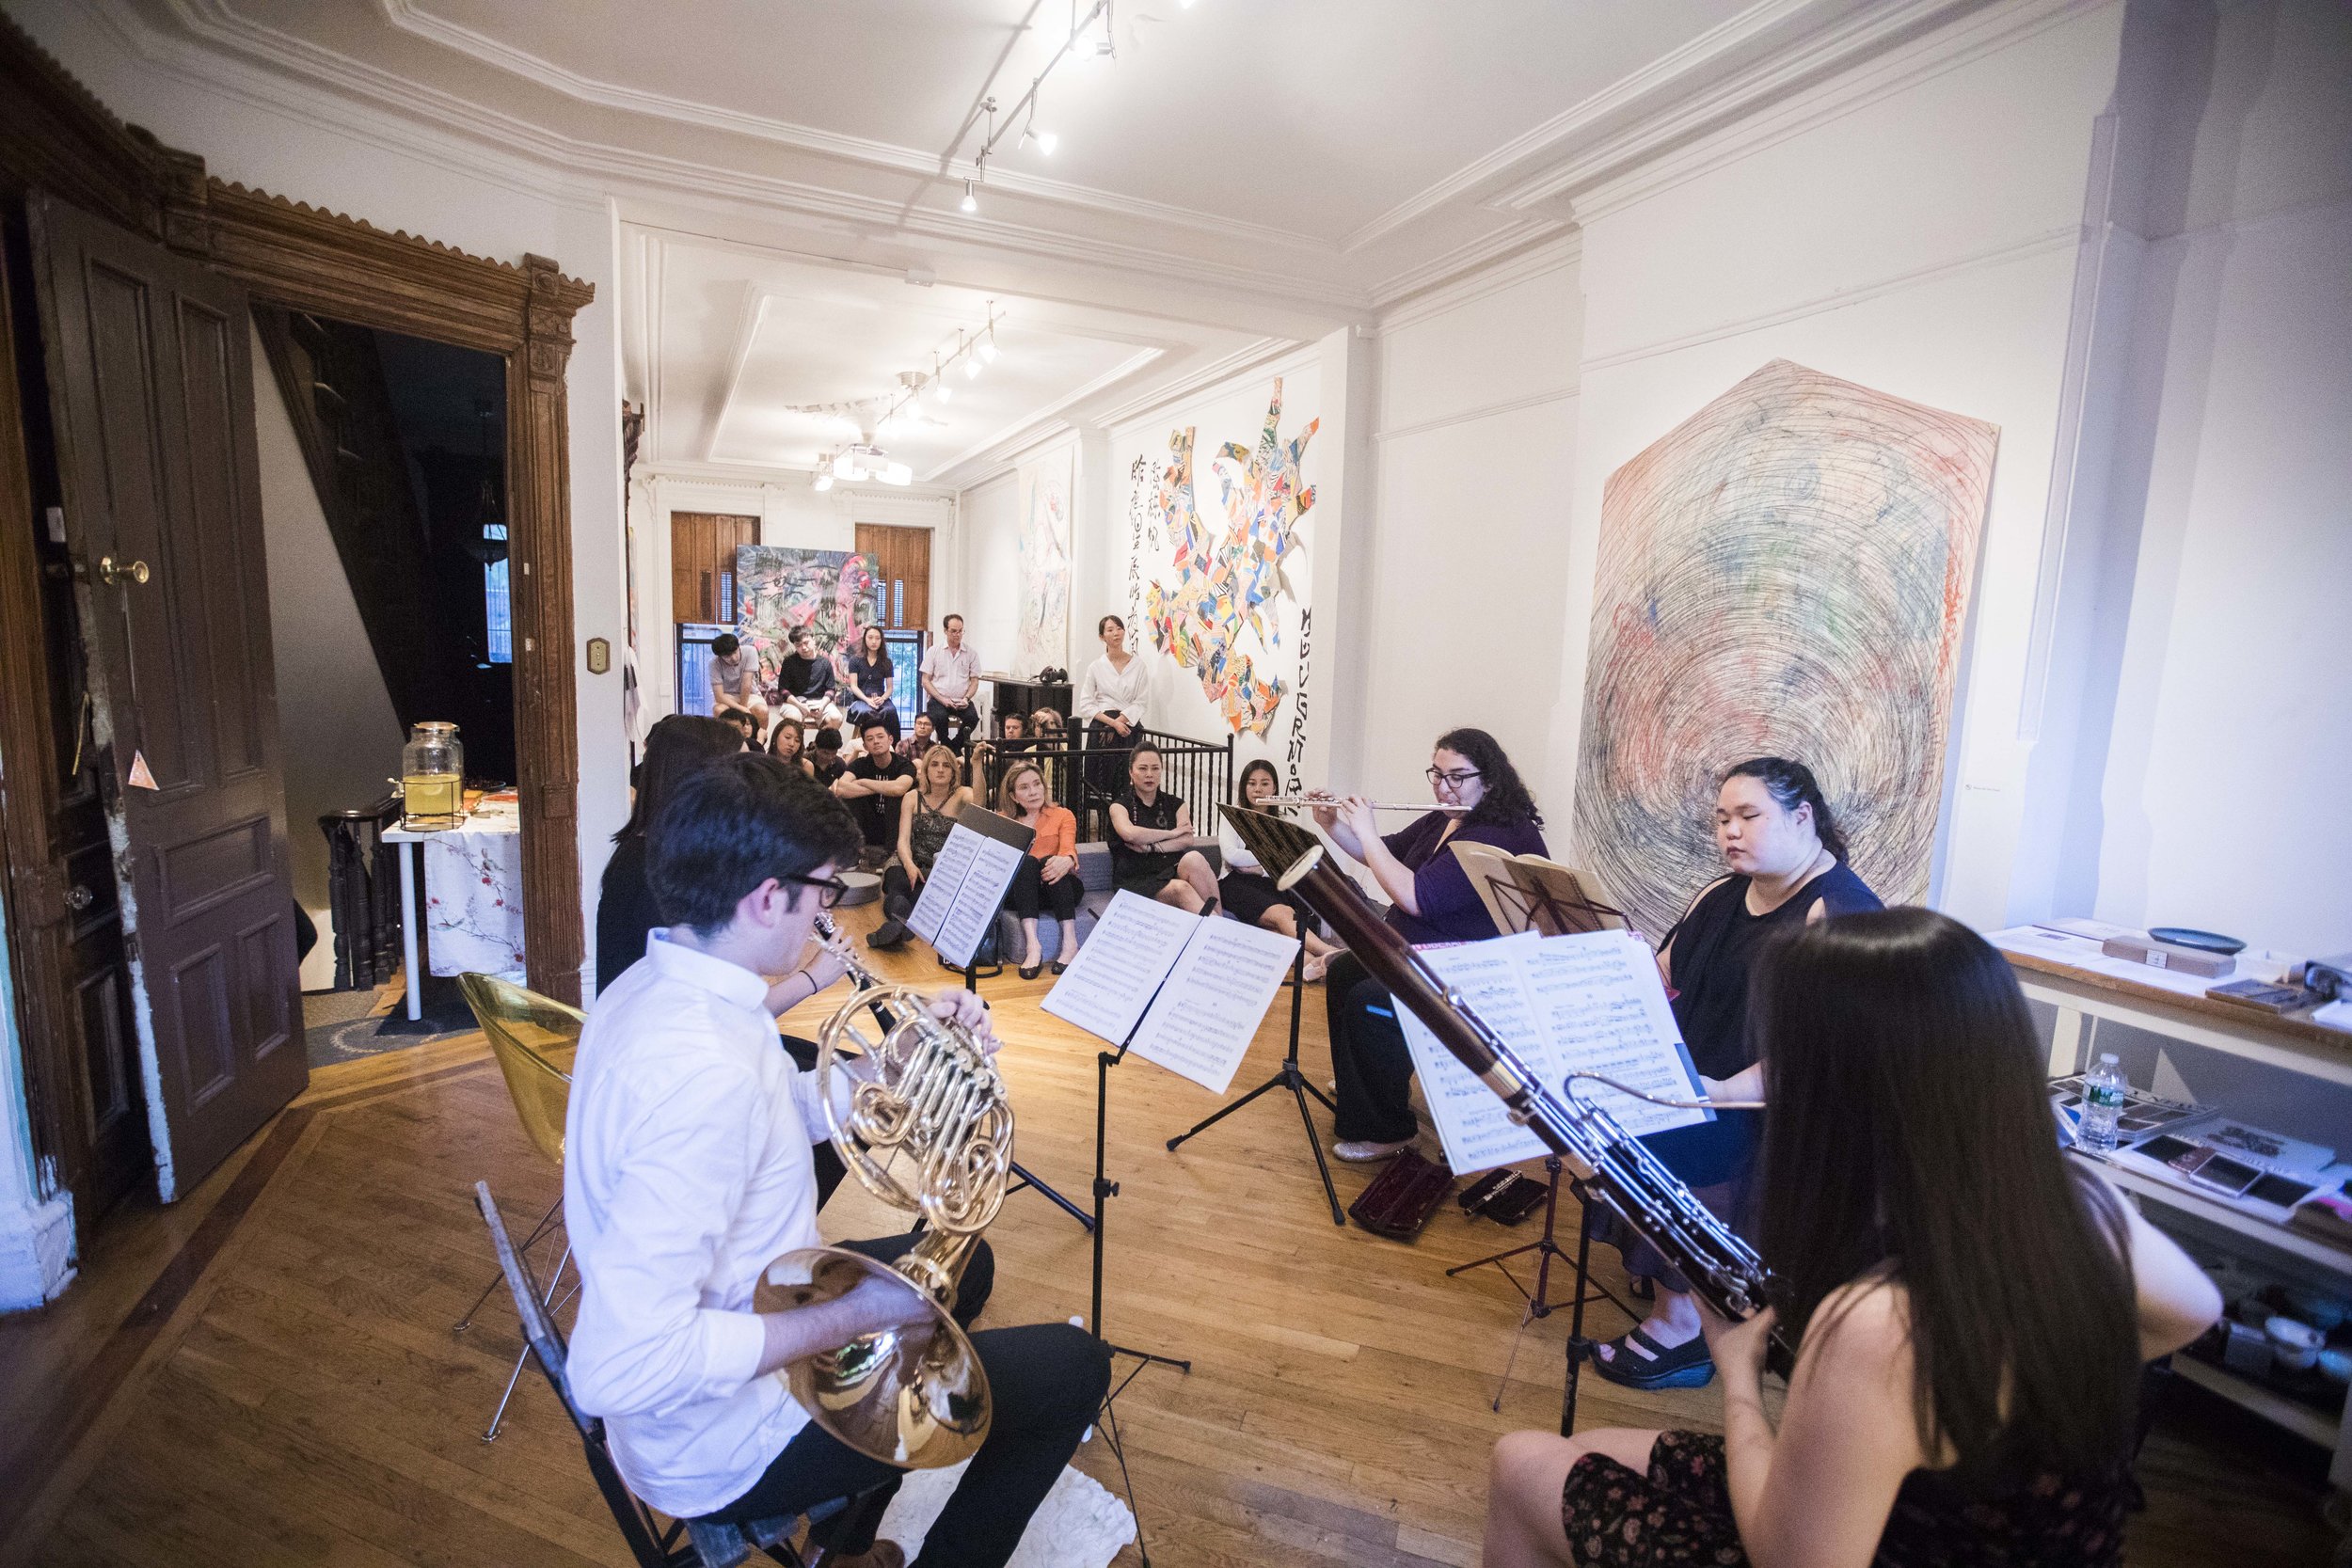   Nevermore - Music Concert  with The Lumisade Quintet at Fou Gallery. Photograph by Nadia Peichao Lin. 昨夜星辰昨夜风 - 木管五重奏音乐会@否画廊，摄影：林沛超. 